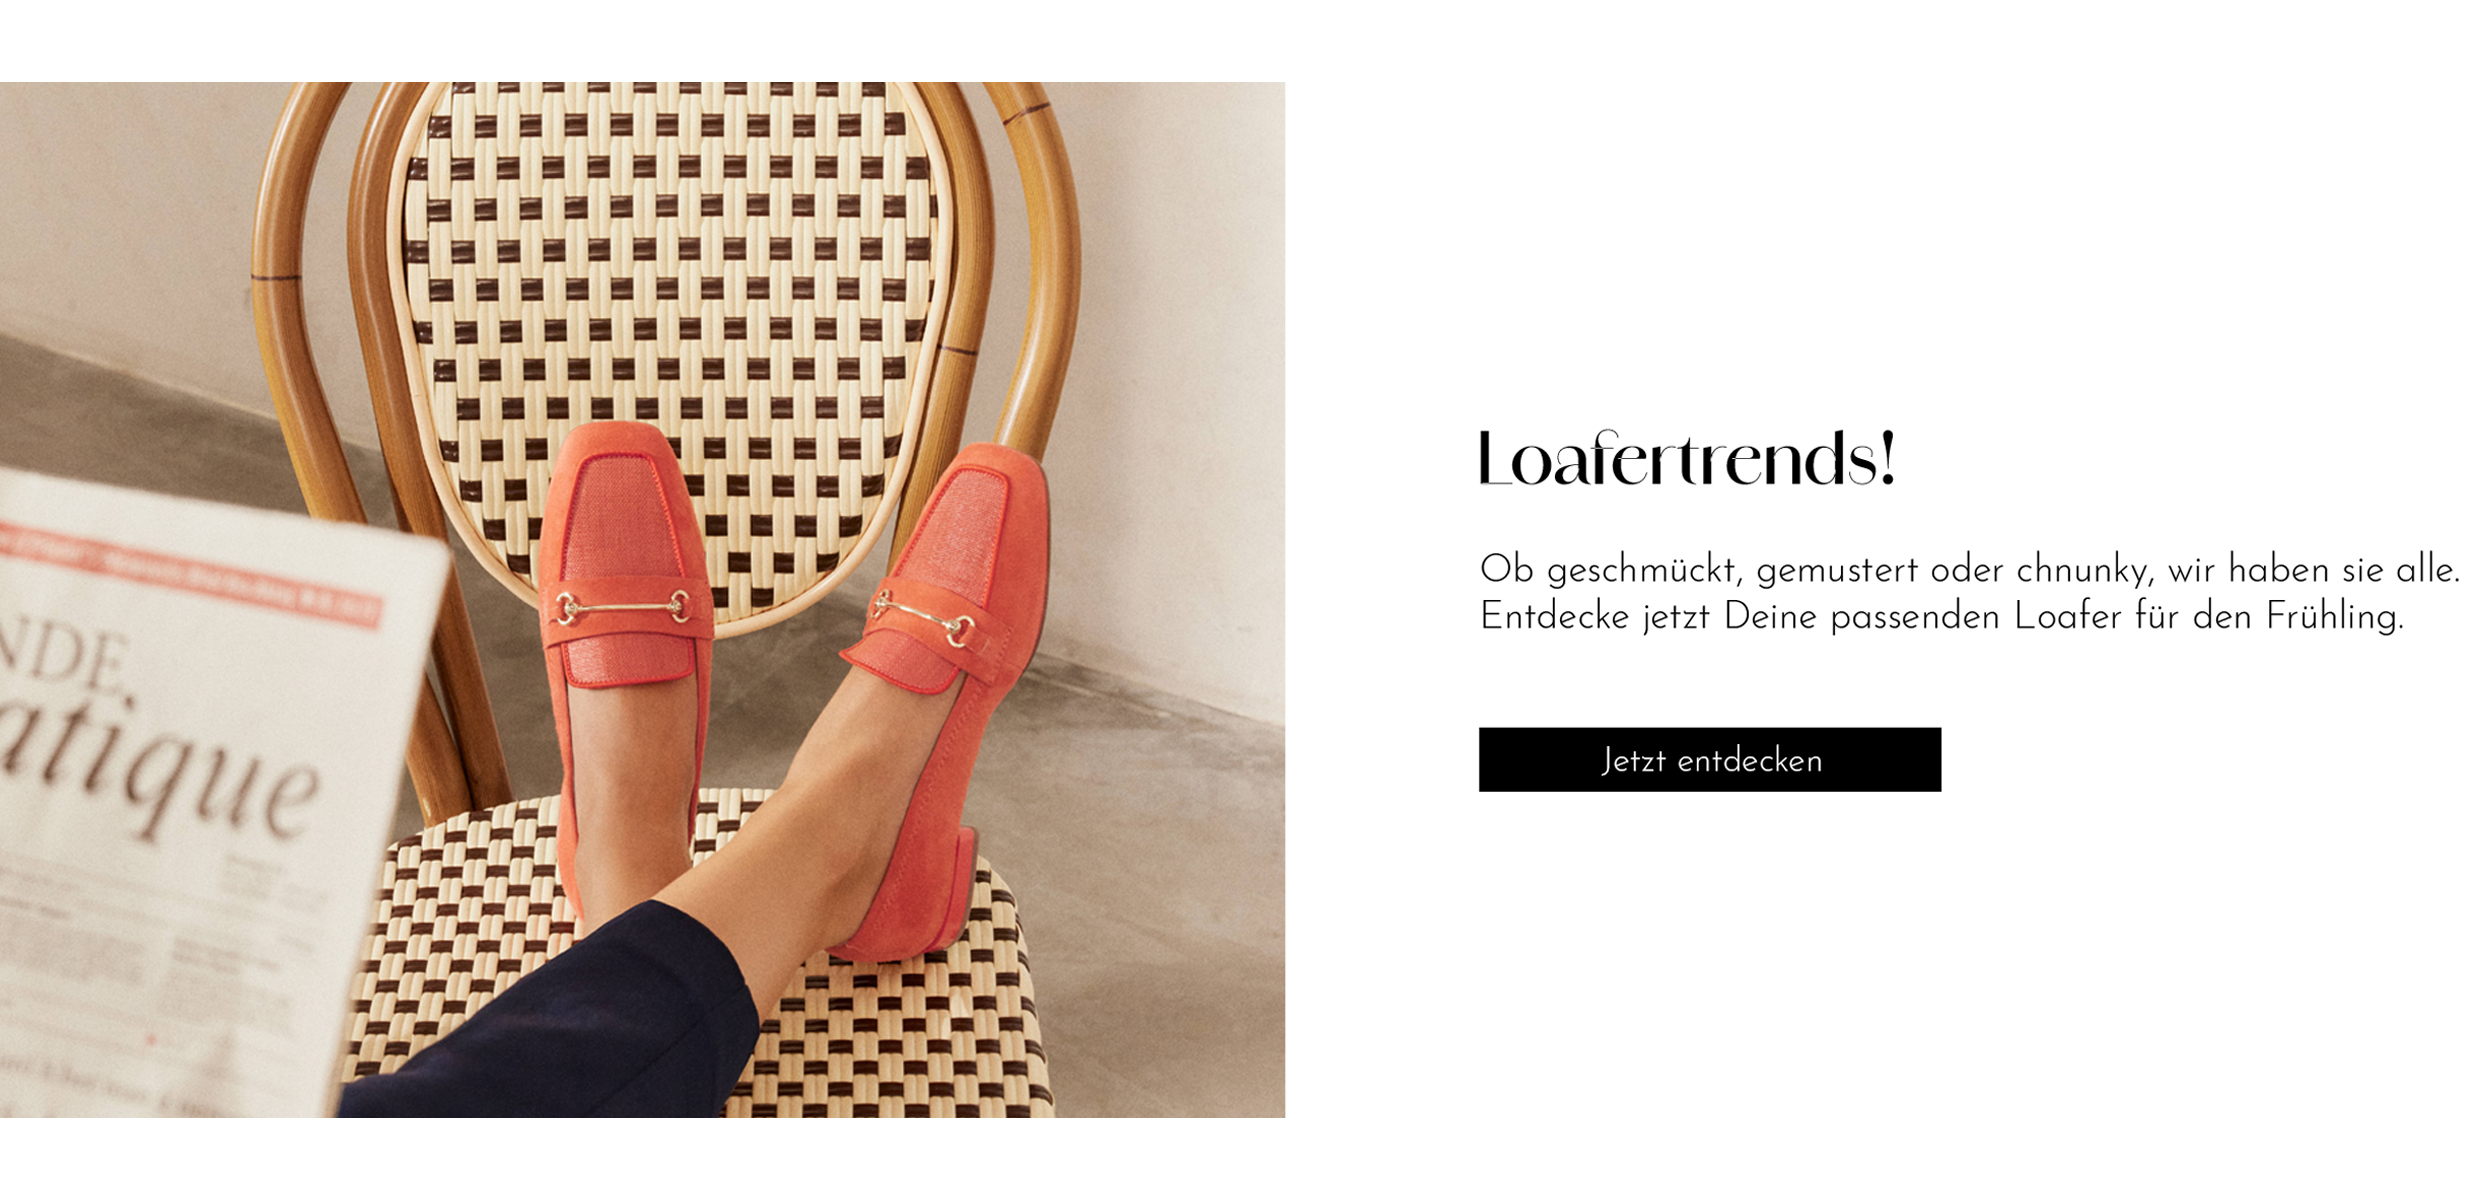 Loafertrends